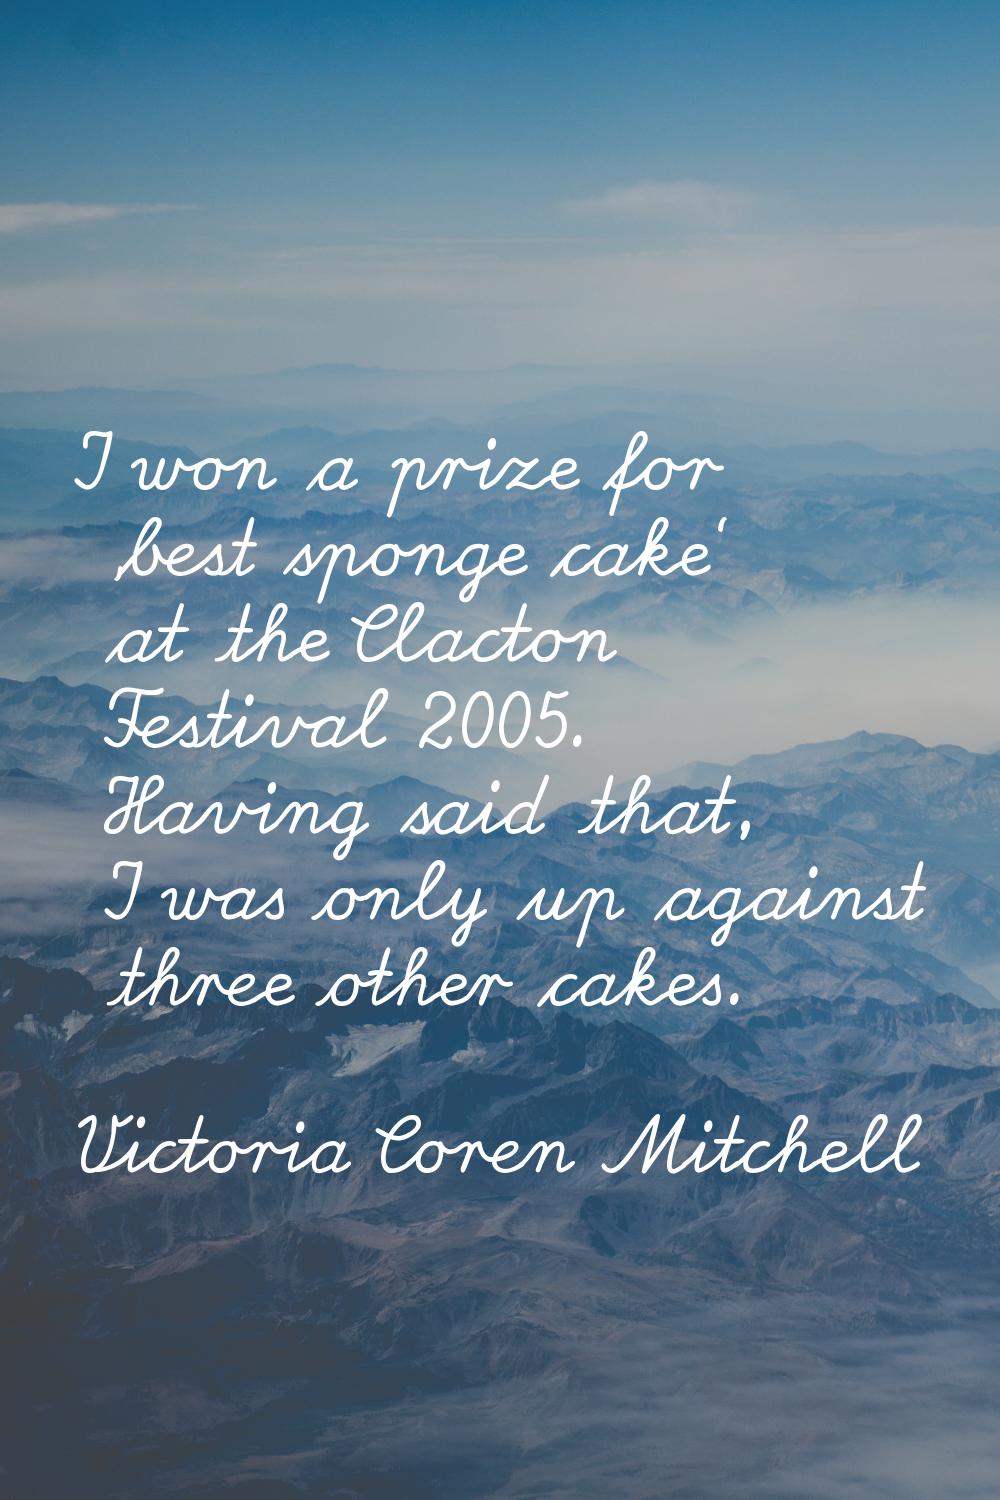 I won a prize for 'best sponge cake' at the Clacton Festival 2005. Having said that, I was only up 